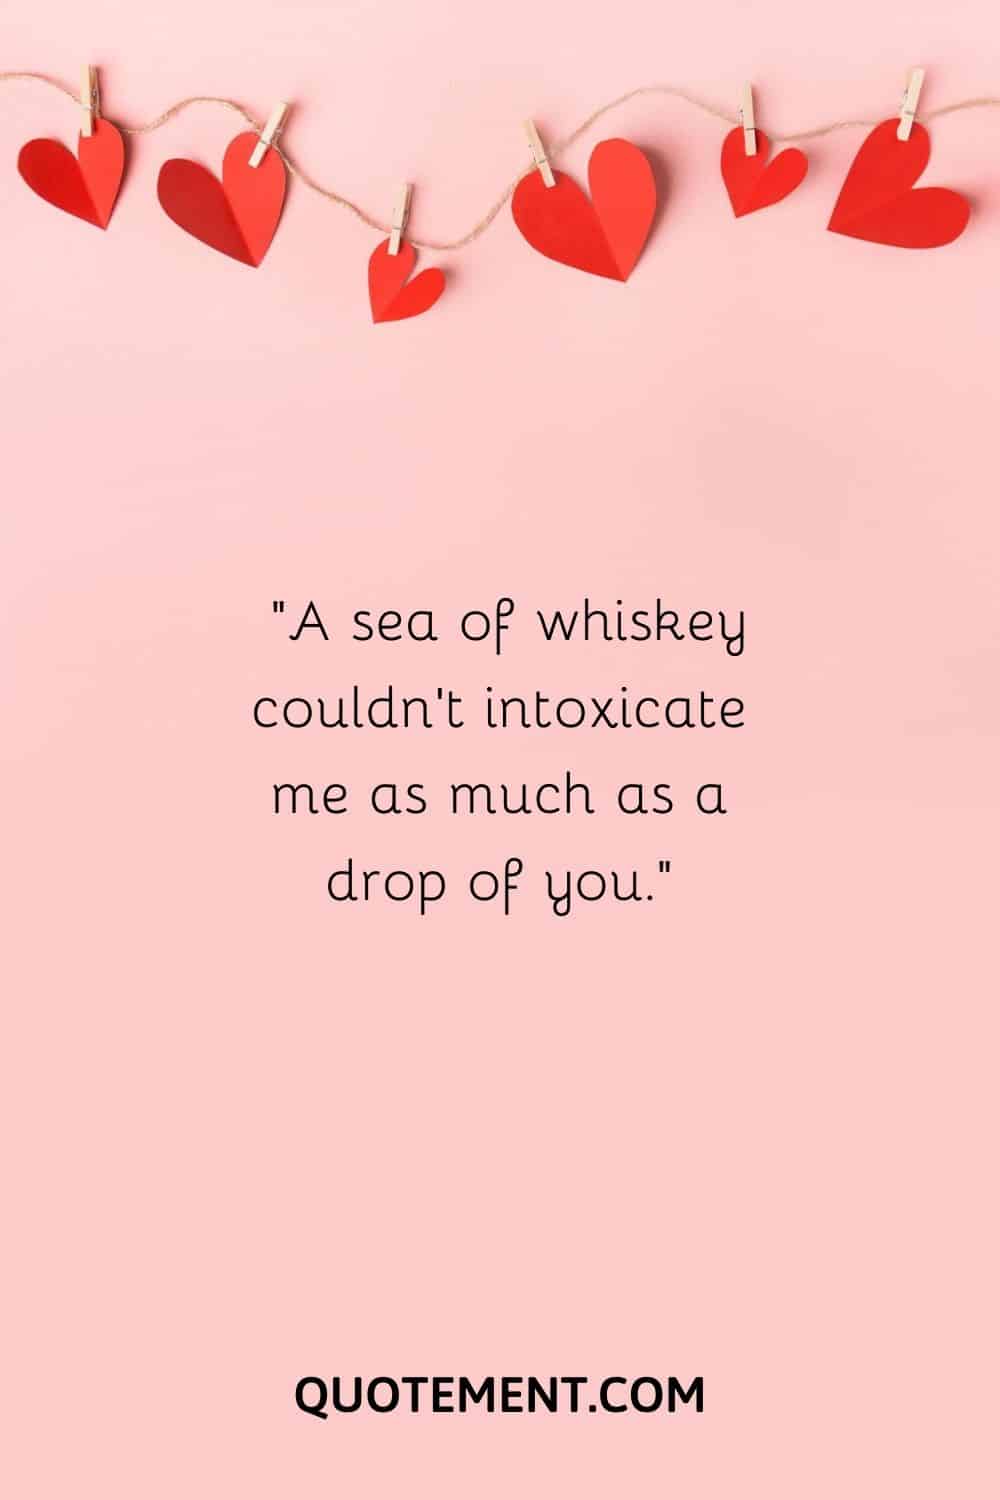 A sea of whiskey couldn't intoxicate me as much as a drop of you